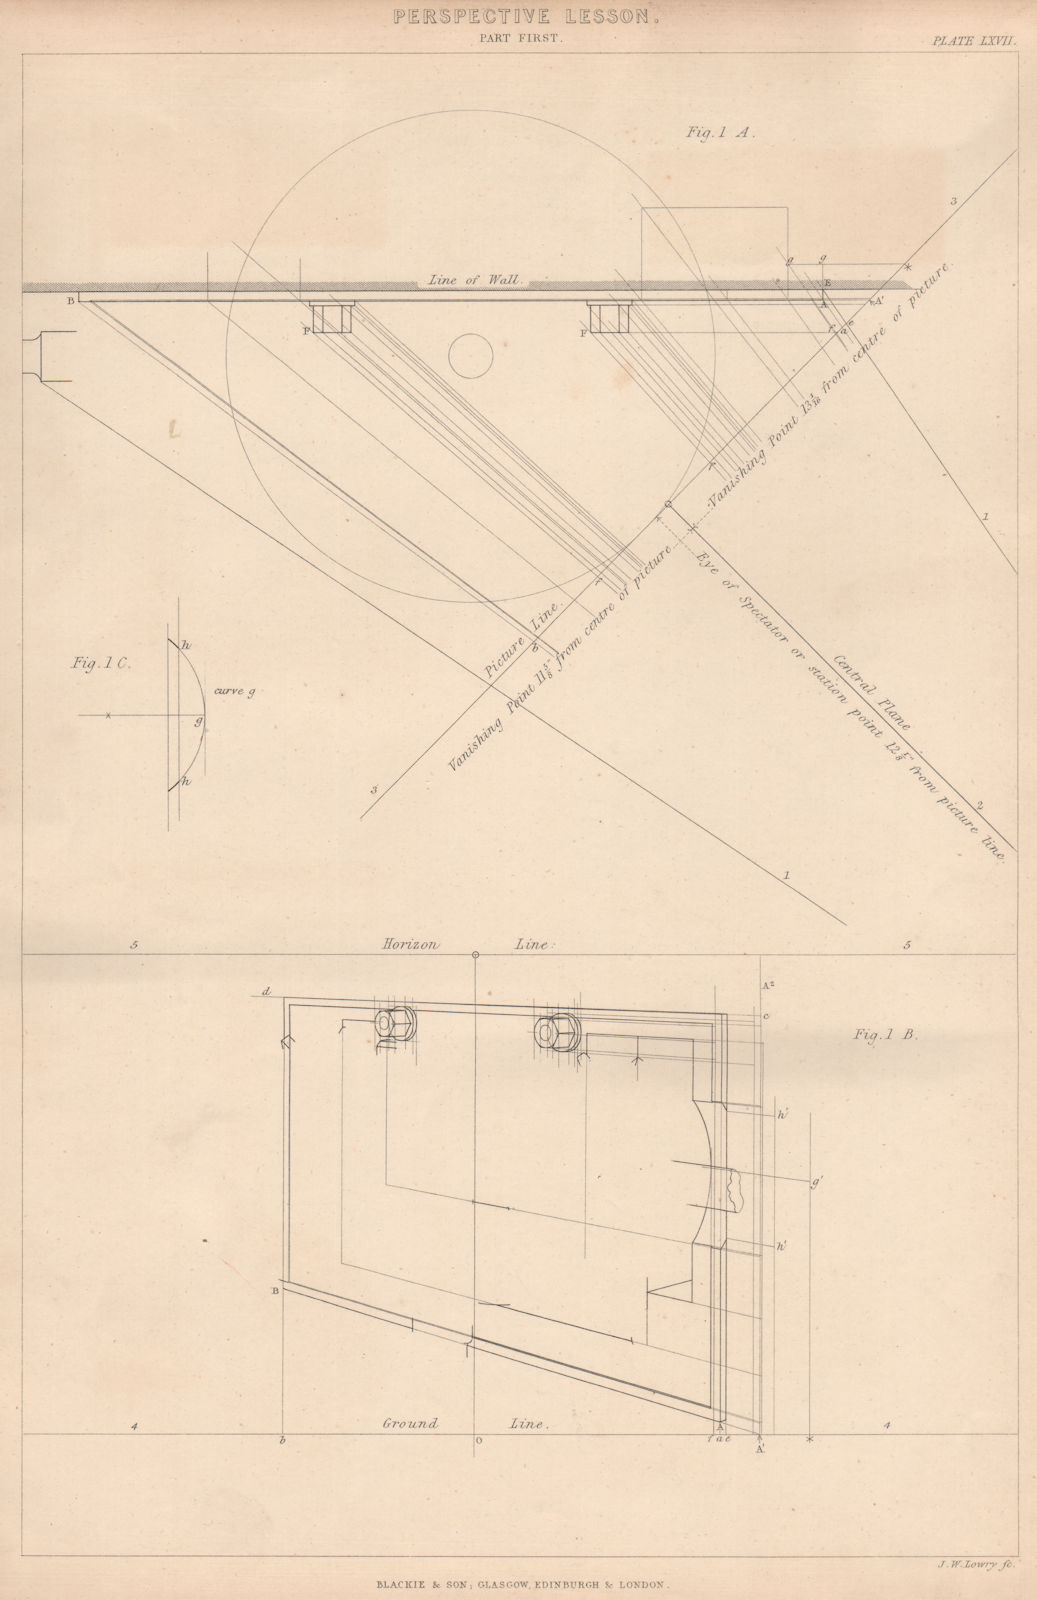 Associate Product VICTORIAN ENGINEERING DRAWING. Perspective Lesson. Part first 1876 old print